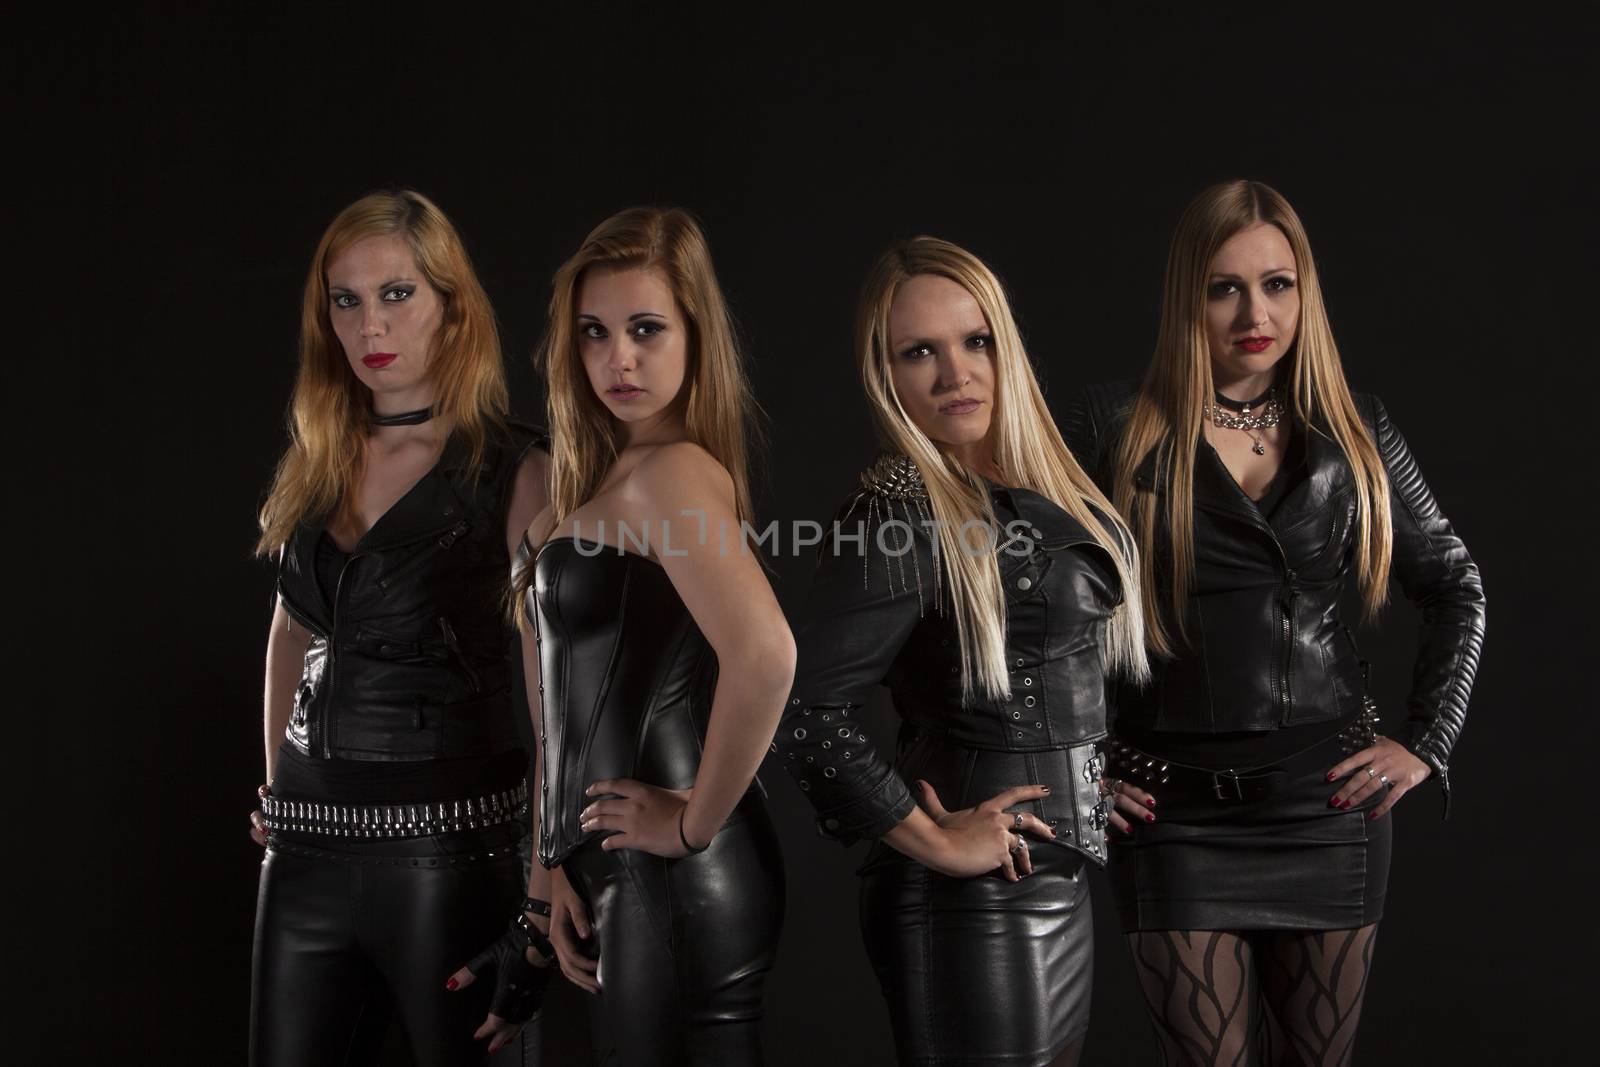 Group of young women wearing leather outfits on black background